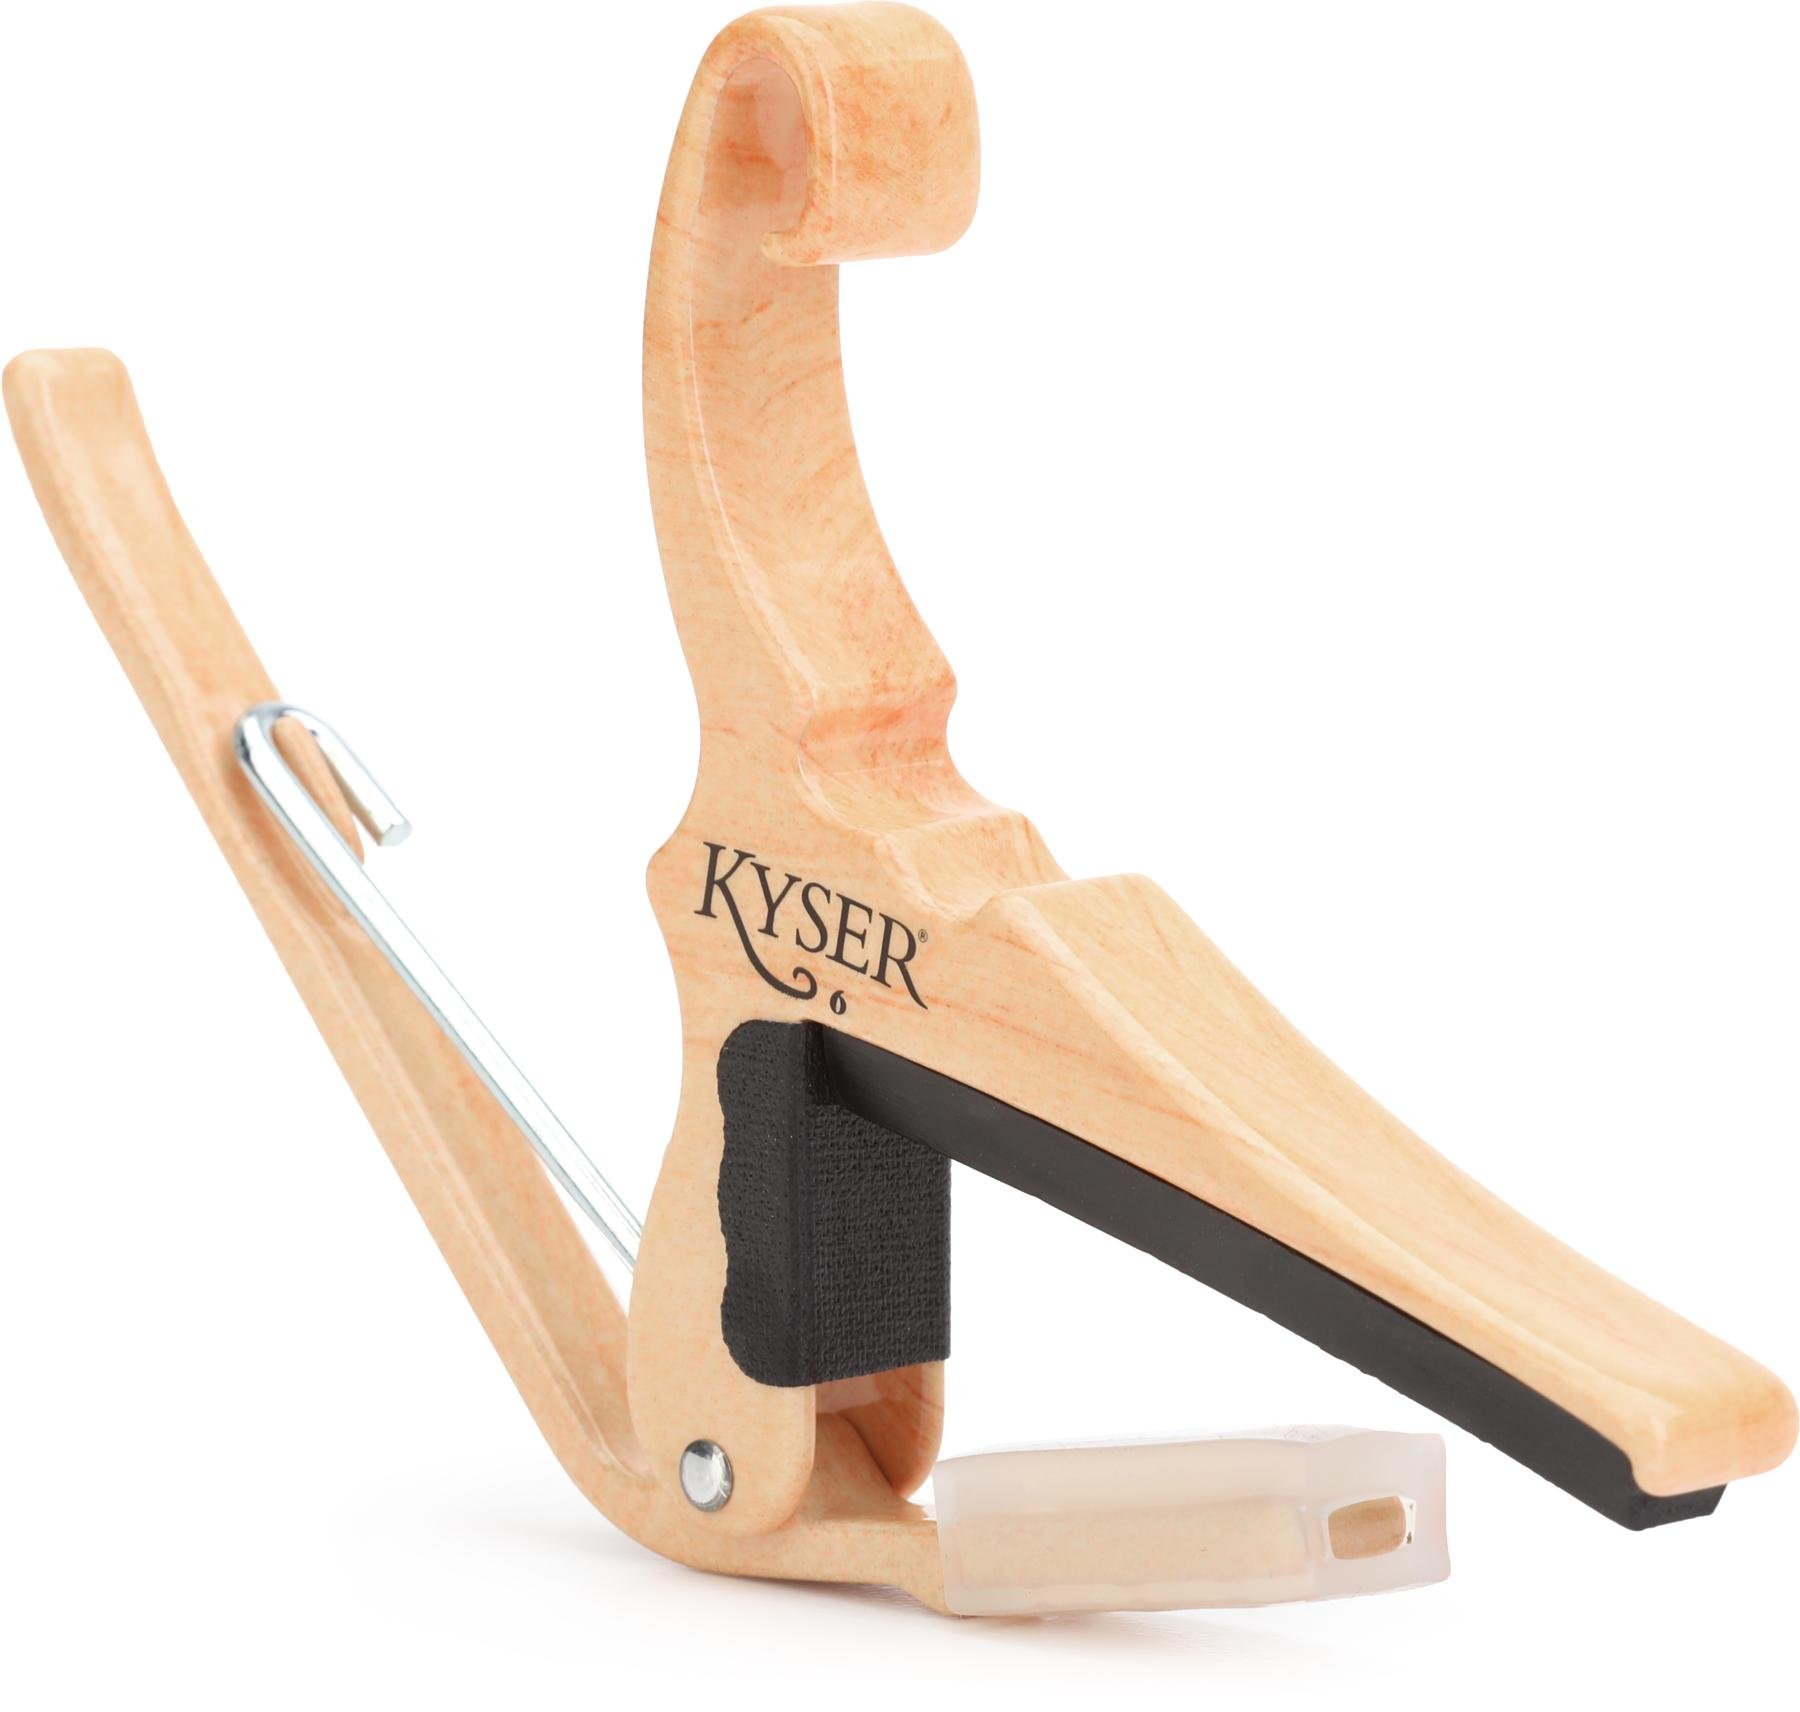 Kyser Quick-Change Capo - Maple | Sweetwater